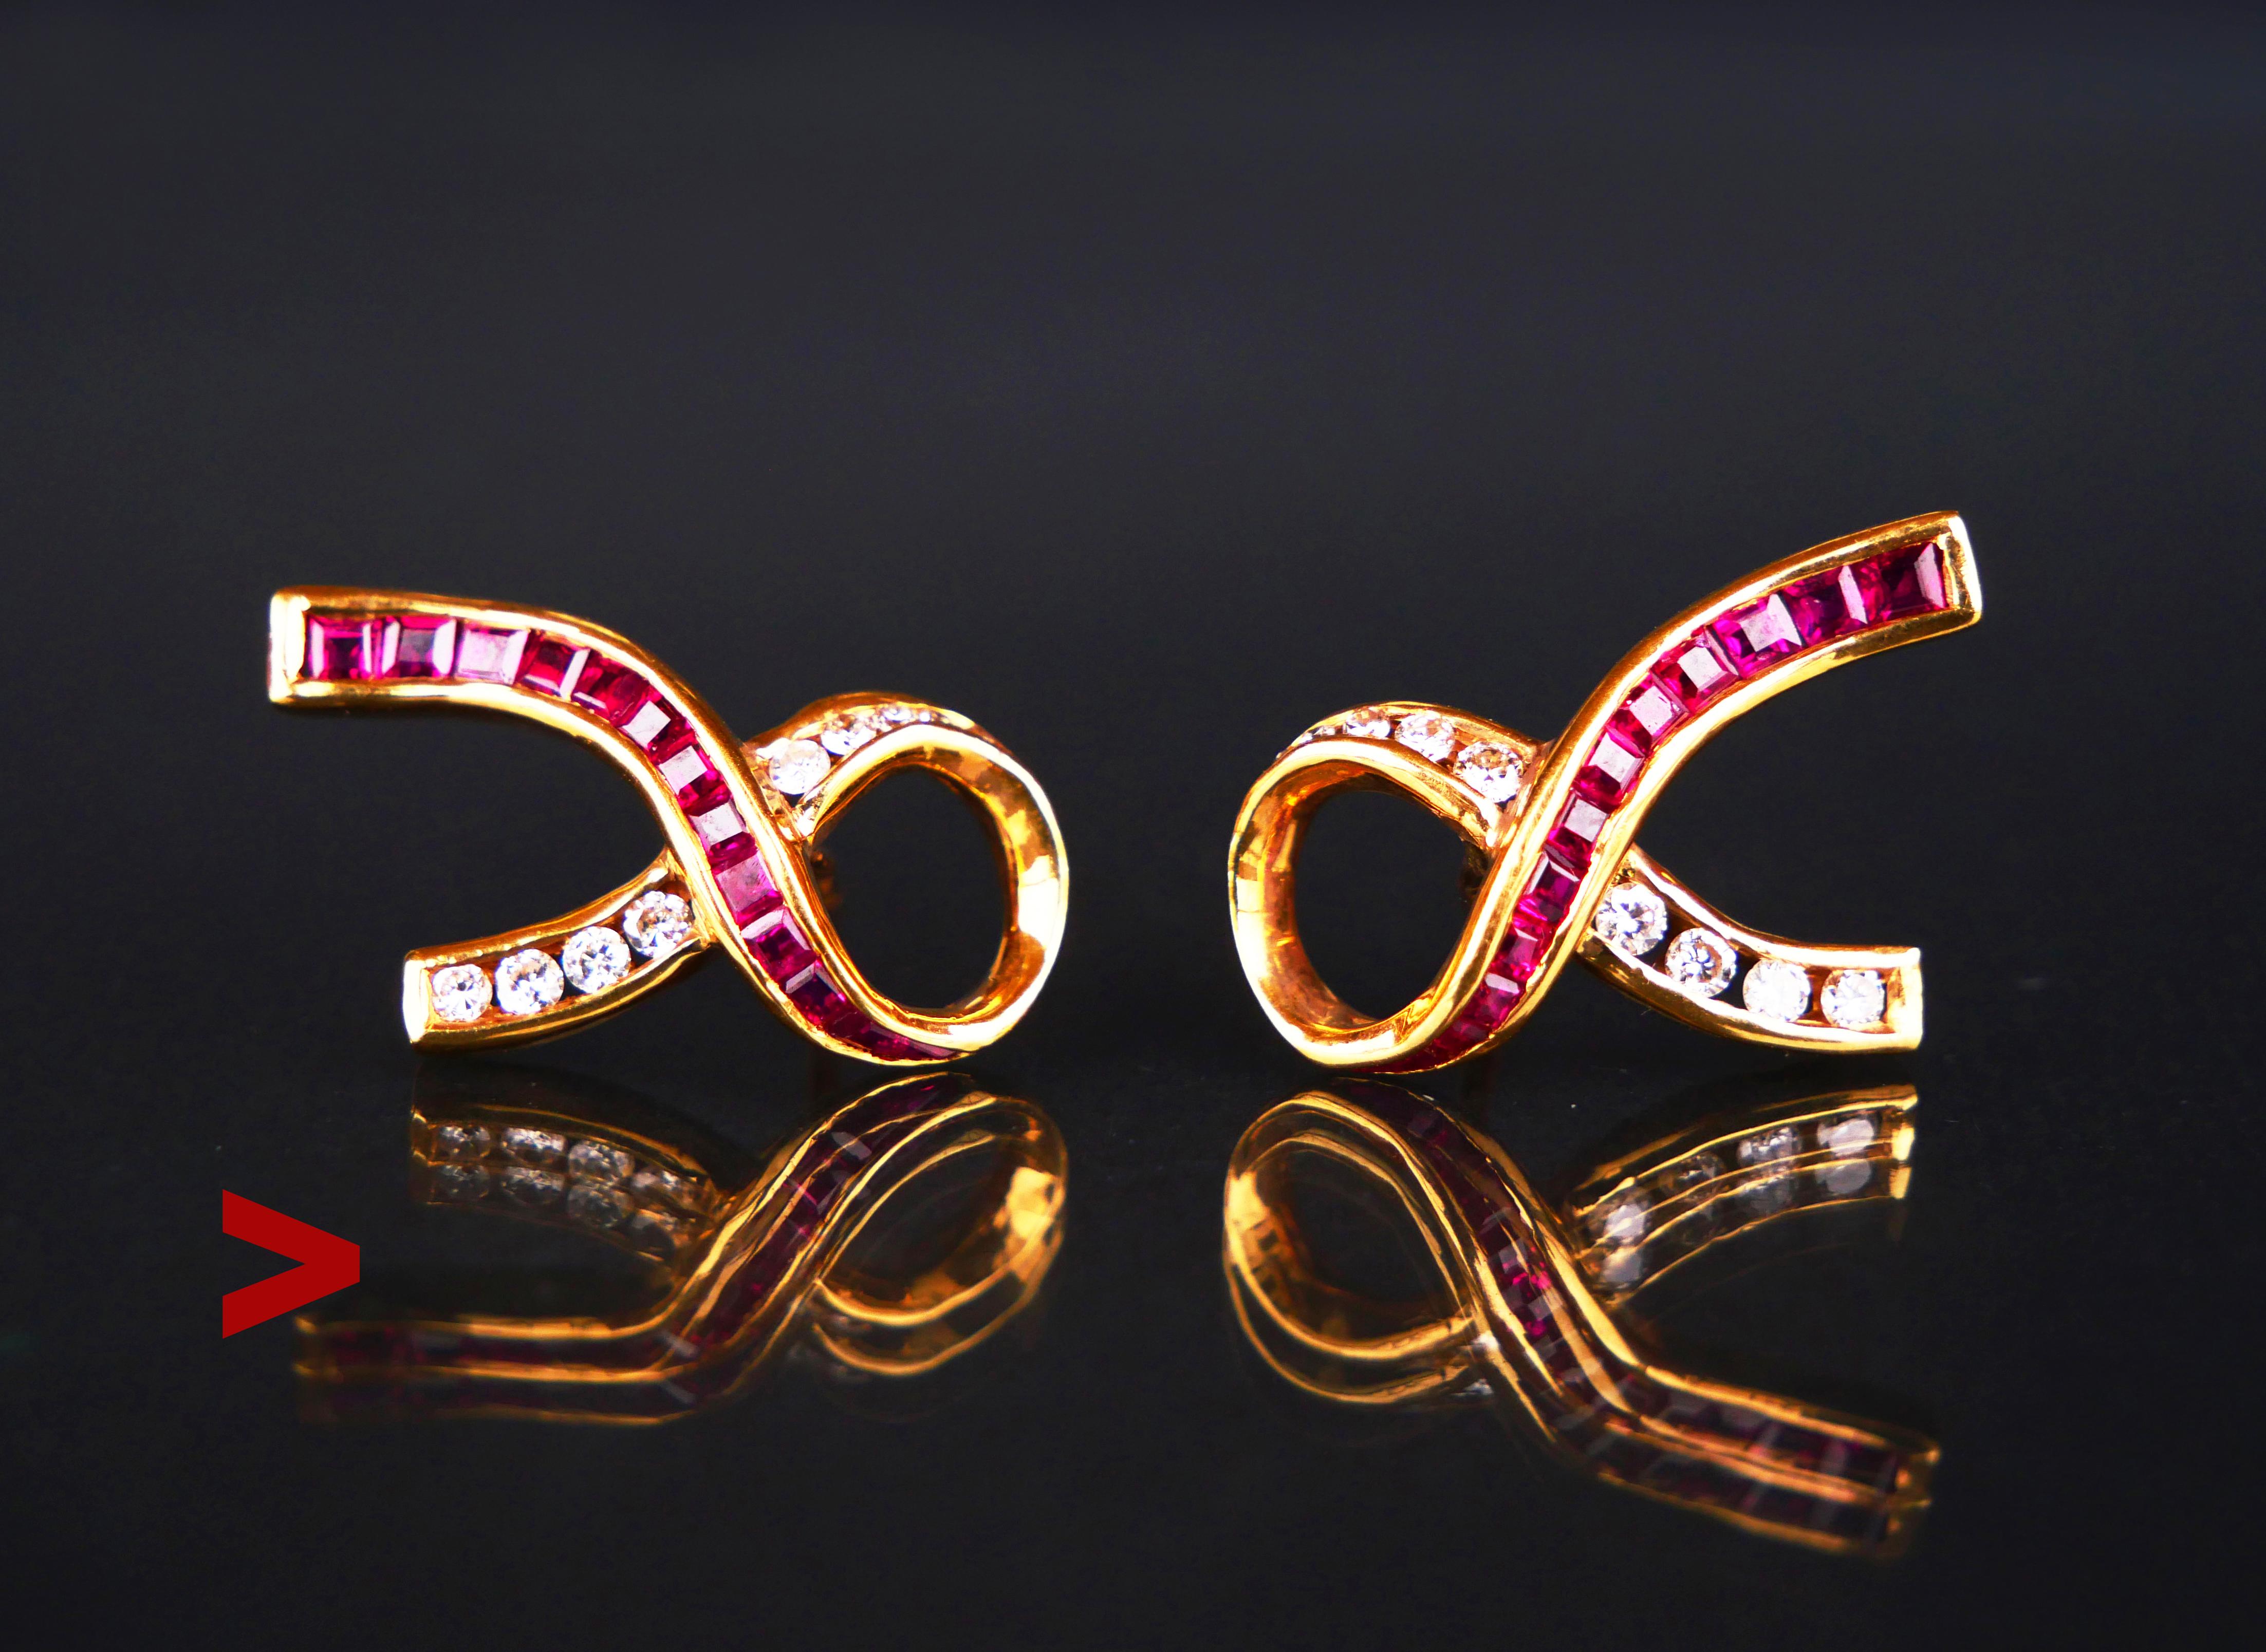 A pair of vintage bow-shaped earrings in 18K Yellow Gold decorated with
Rubies and Diamonds.

Swedish crowns, 18K hallmarks on both stoppers.

Each earring is 22 mm long x 12 mm wide x 5 mm deep.

On each earring, there are 12 natural Rubies of